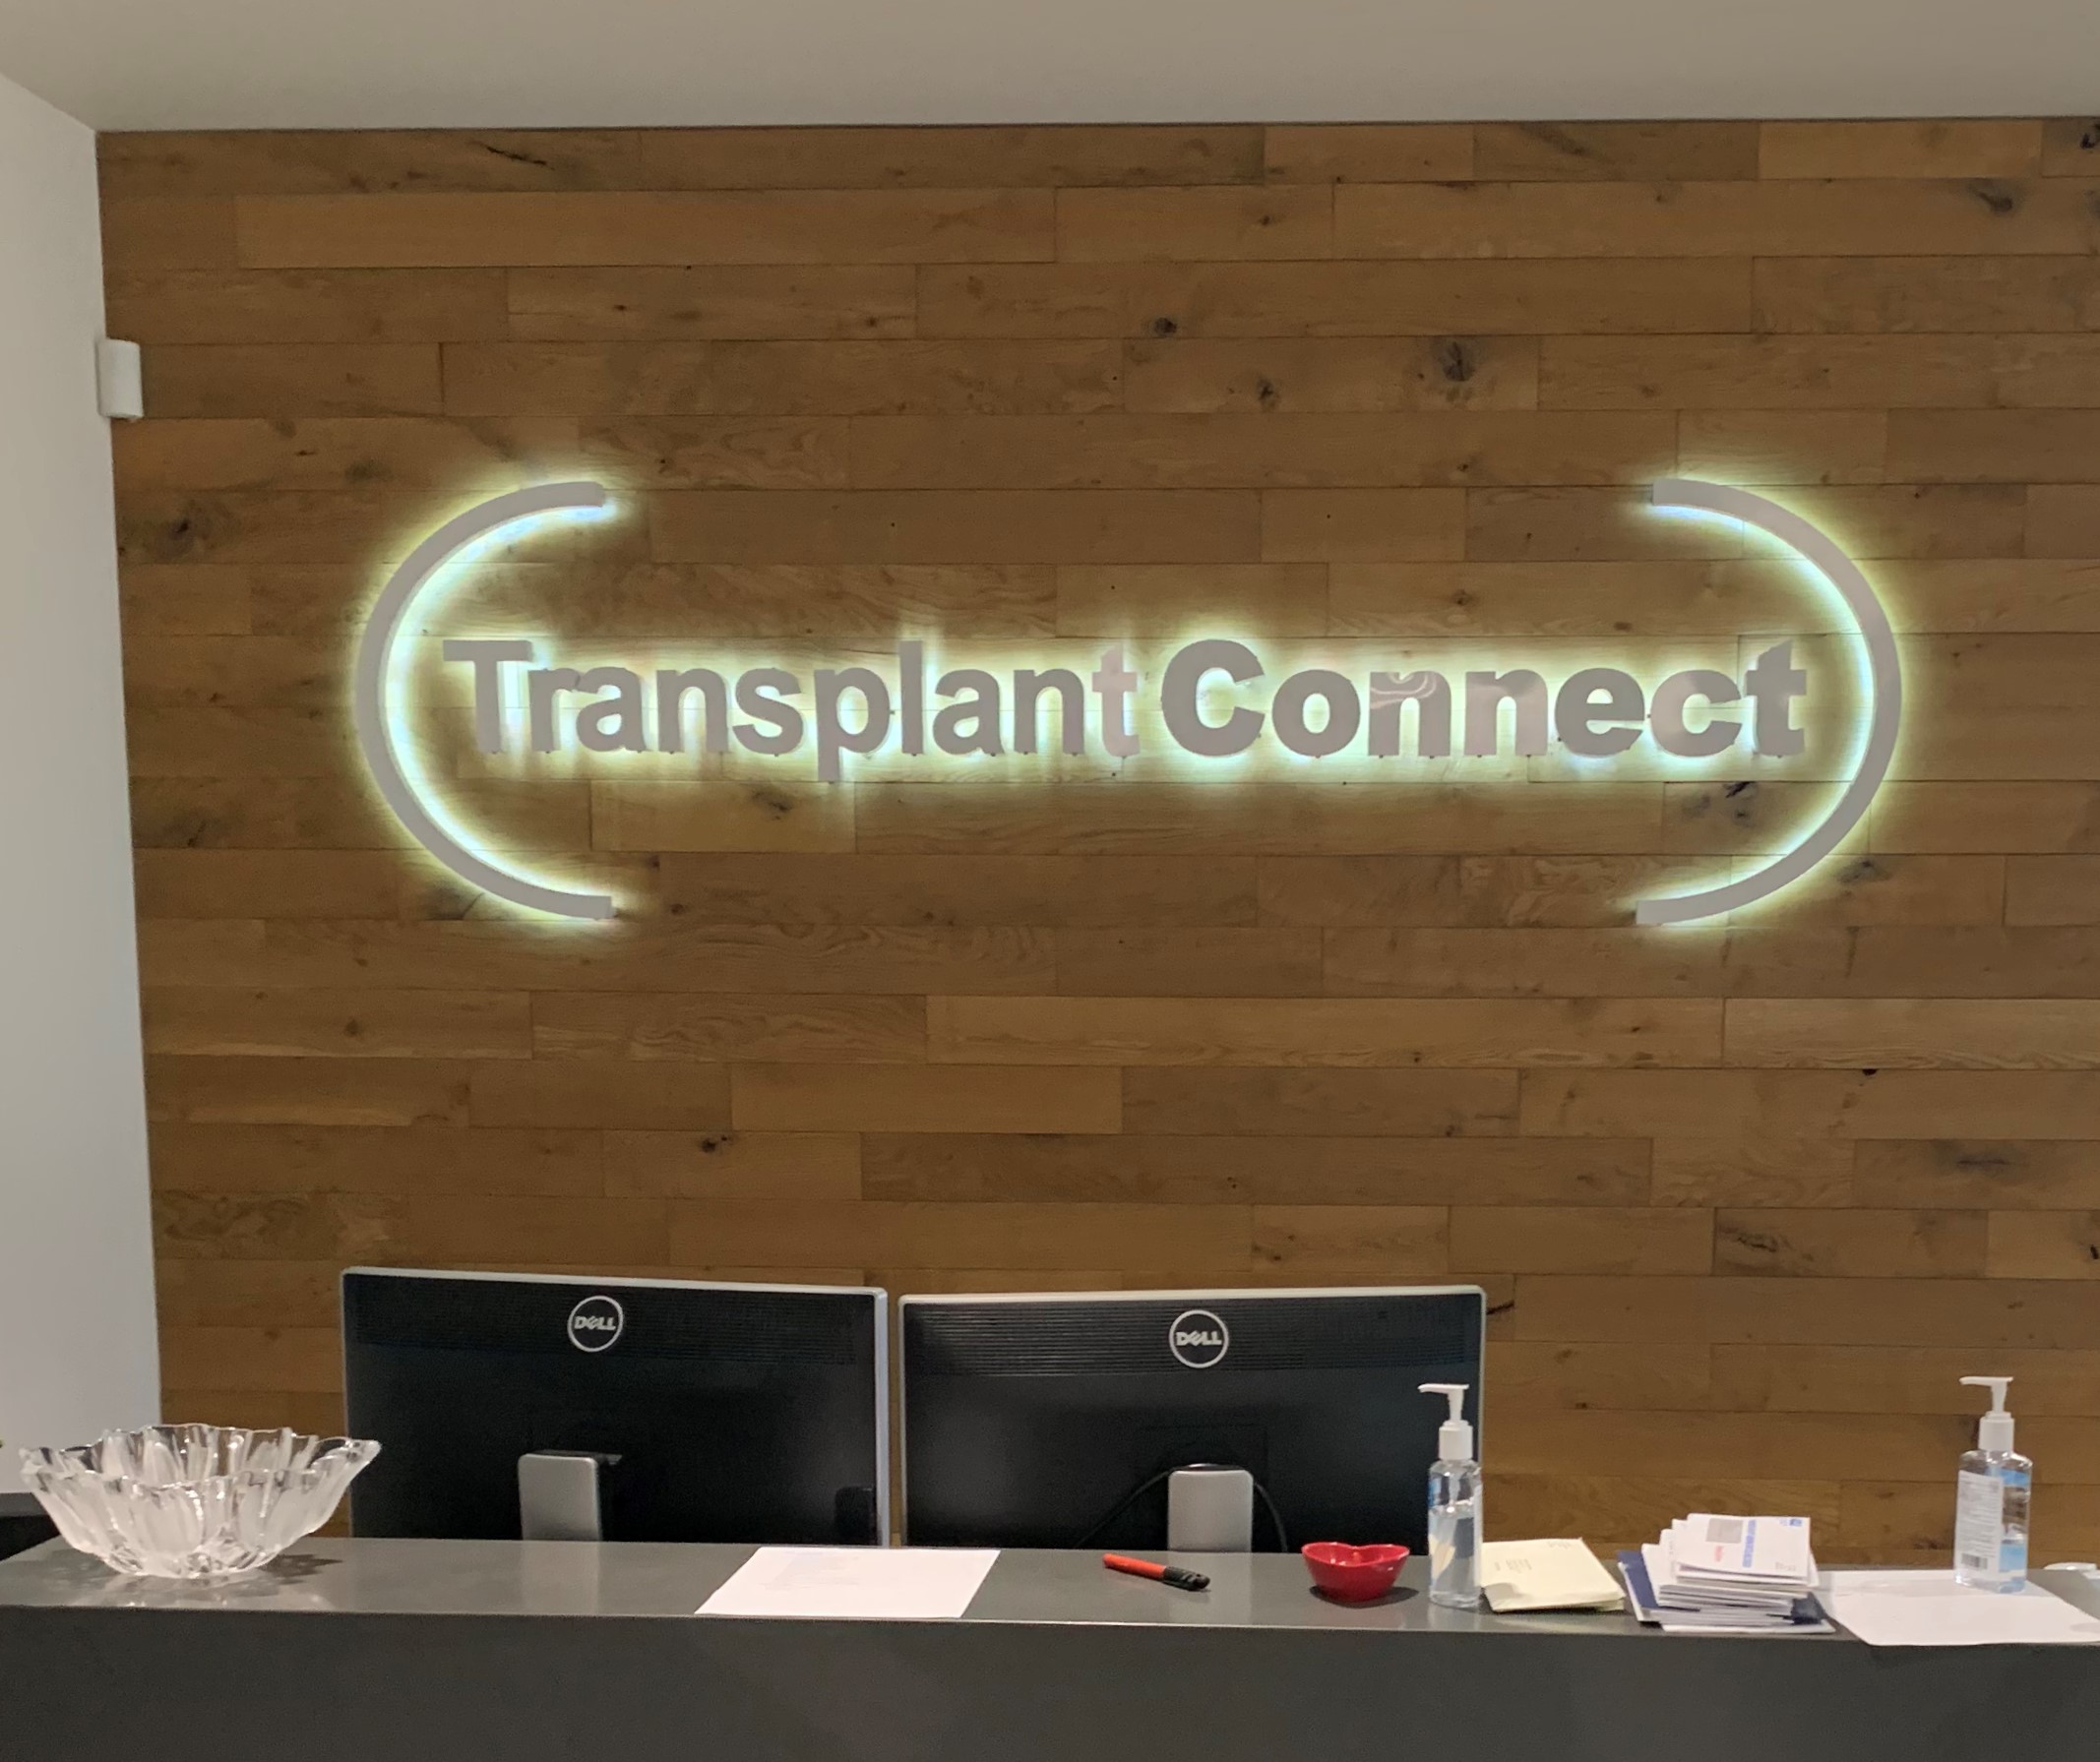 Our tech firm office lobby sign for Transplant Connect's Los Angeles facility, an eye-catching display that will enhance their workplace.